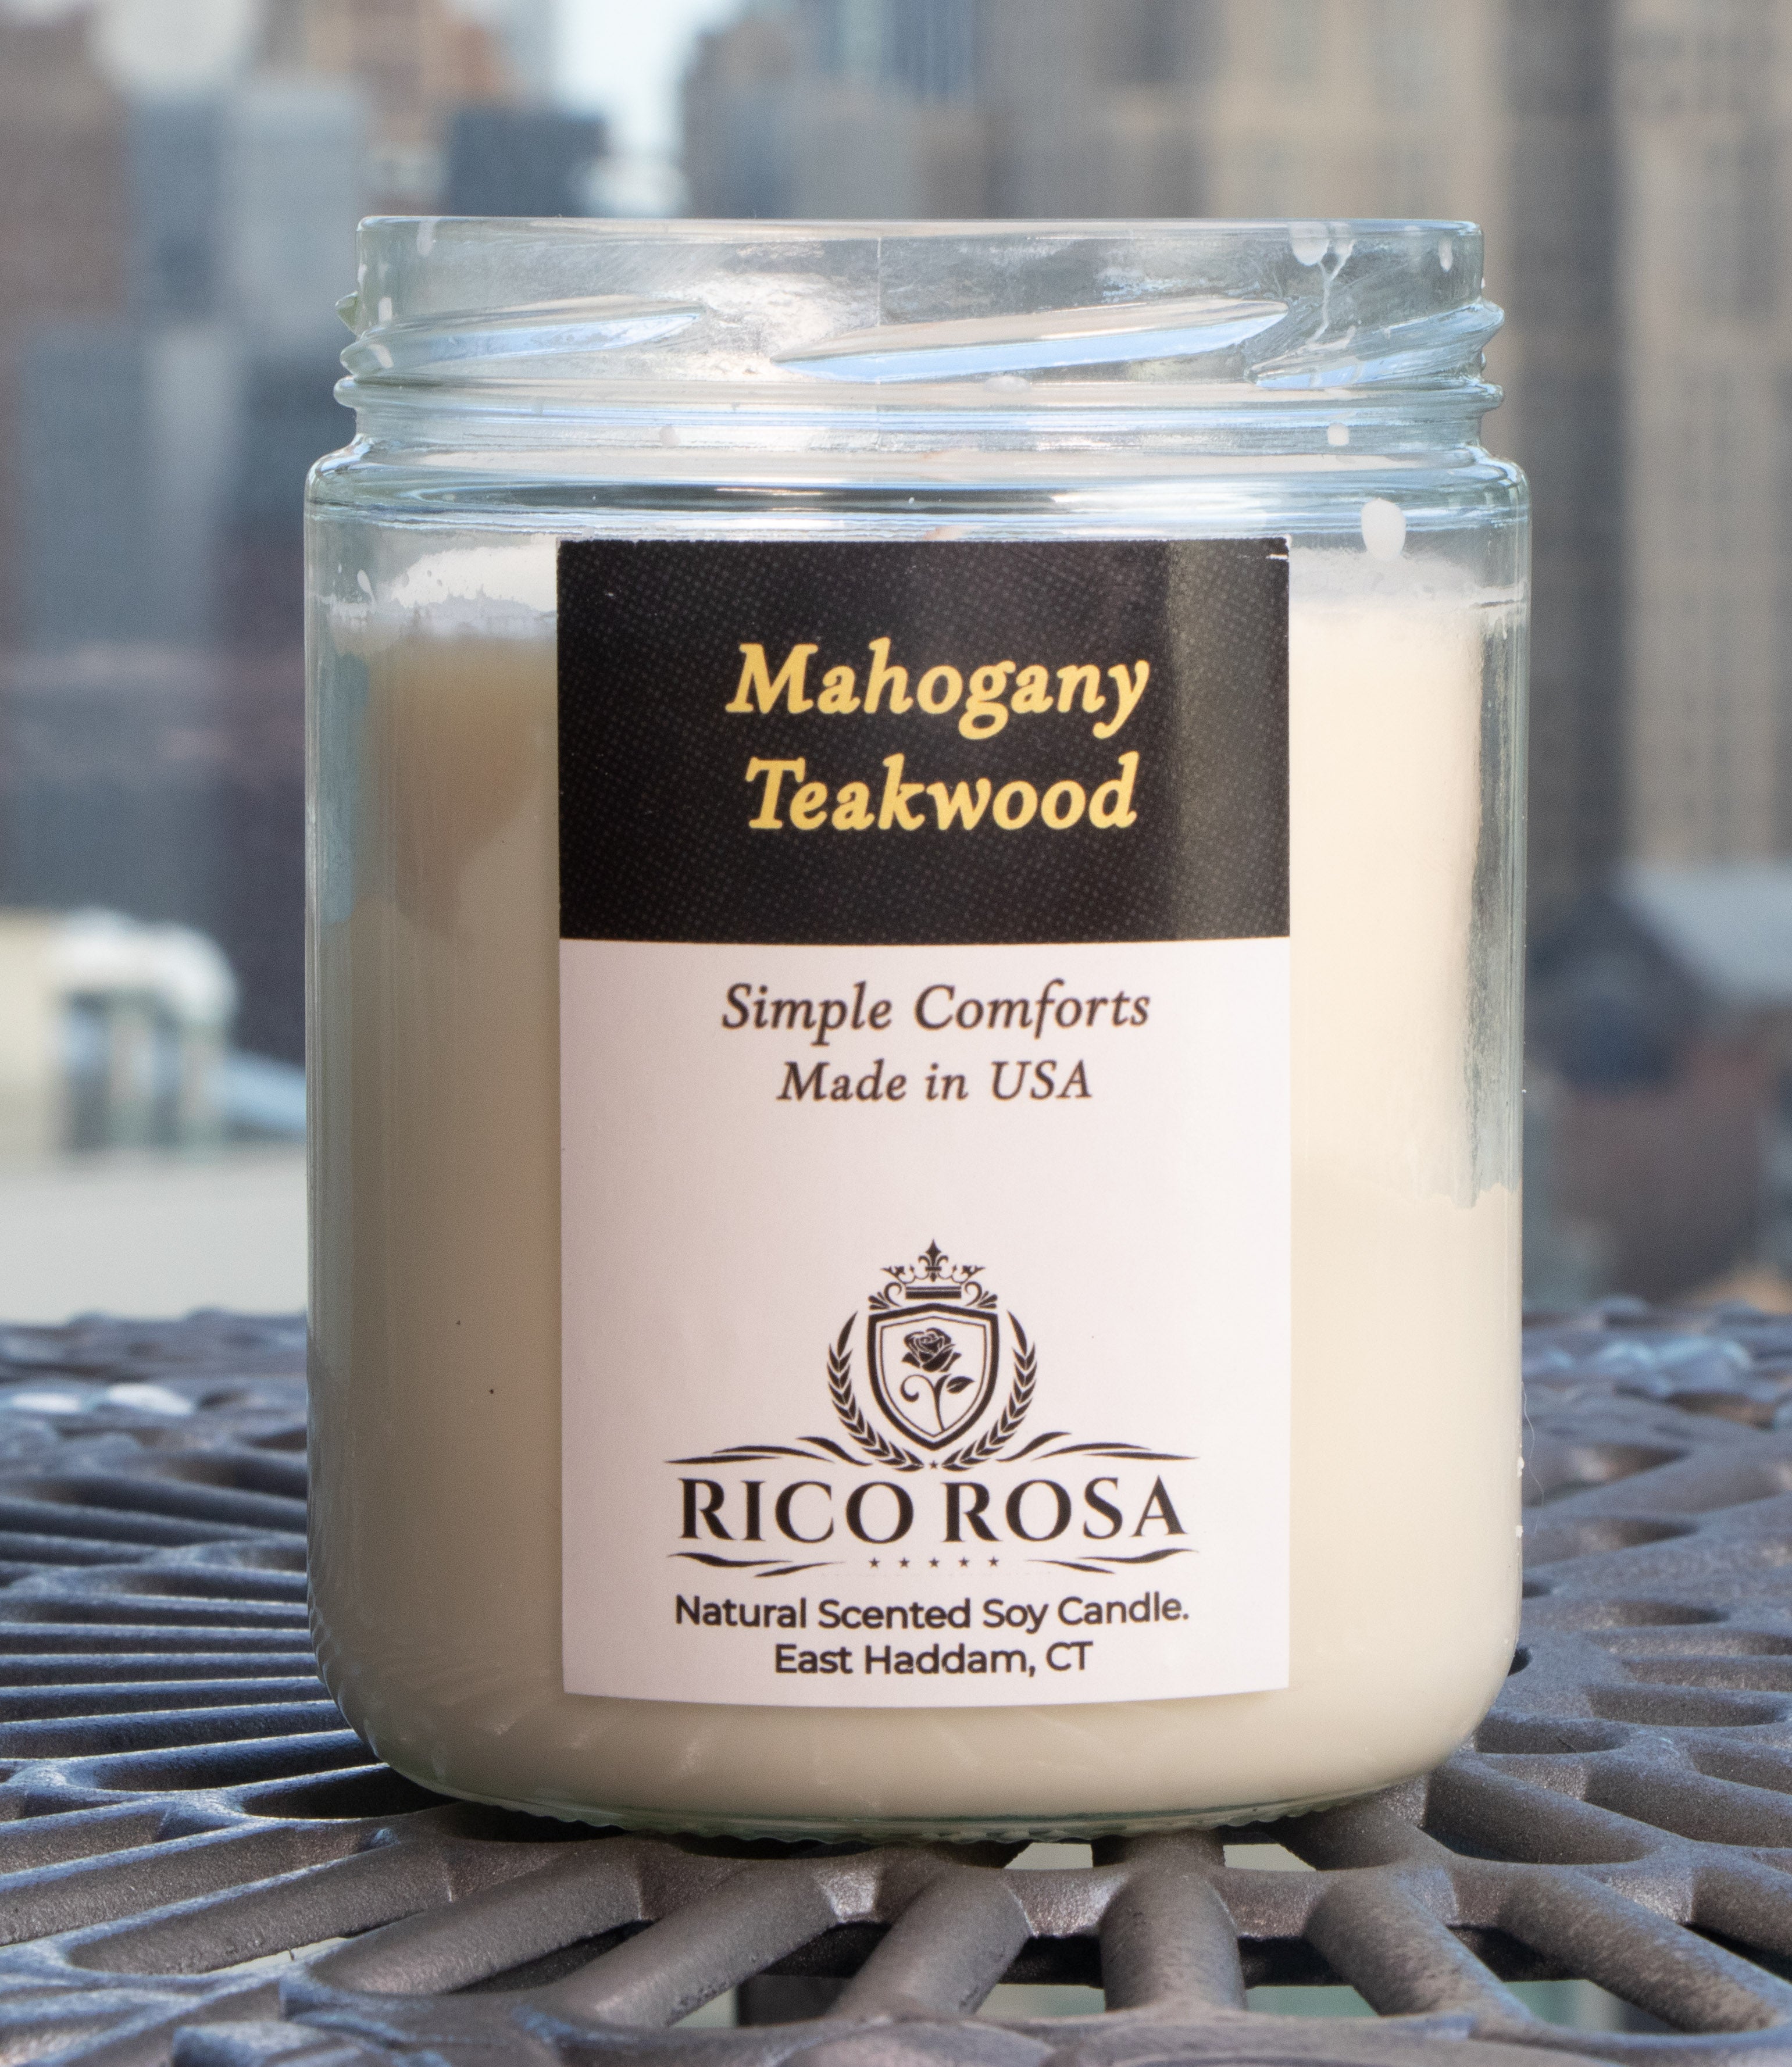 Mahogany Teakwood, Lone Star Candles & More's Premium Hand Poured Soy Wax  Melts, A Rich Blend of Fine Woods and Florals, 12 Wax Cubes, USA Made in